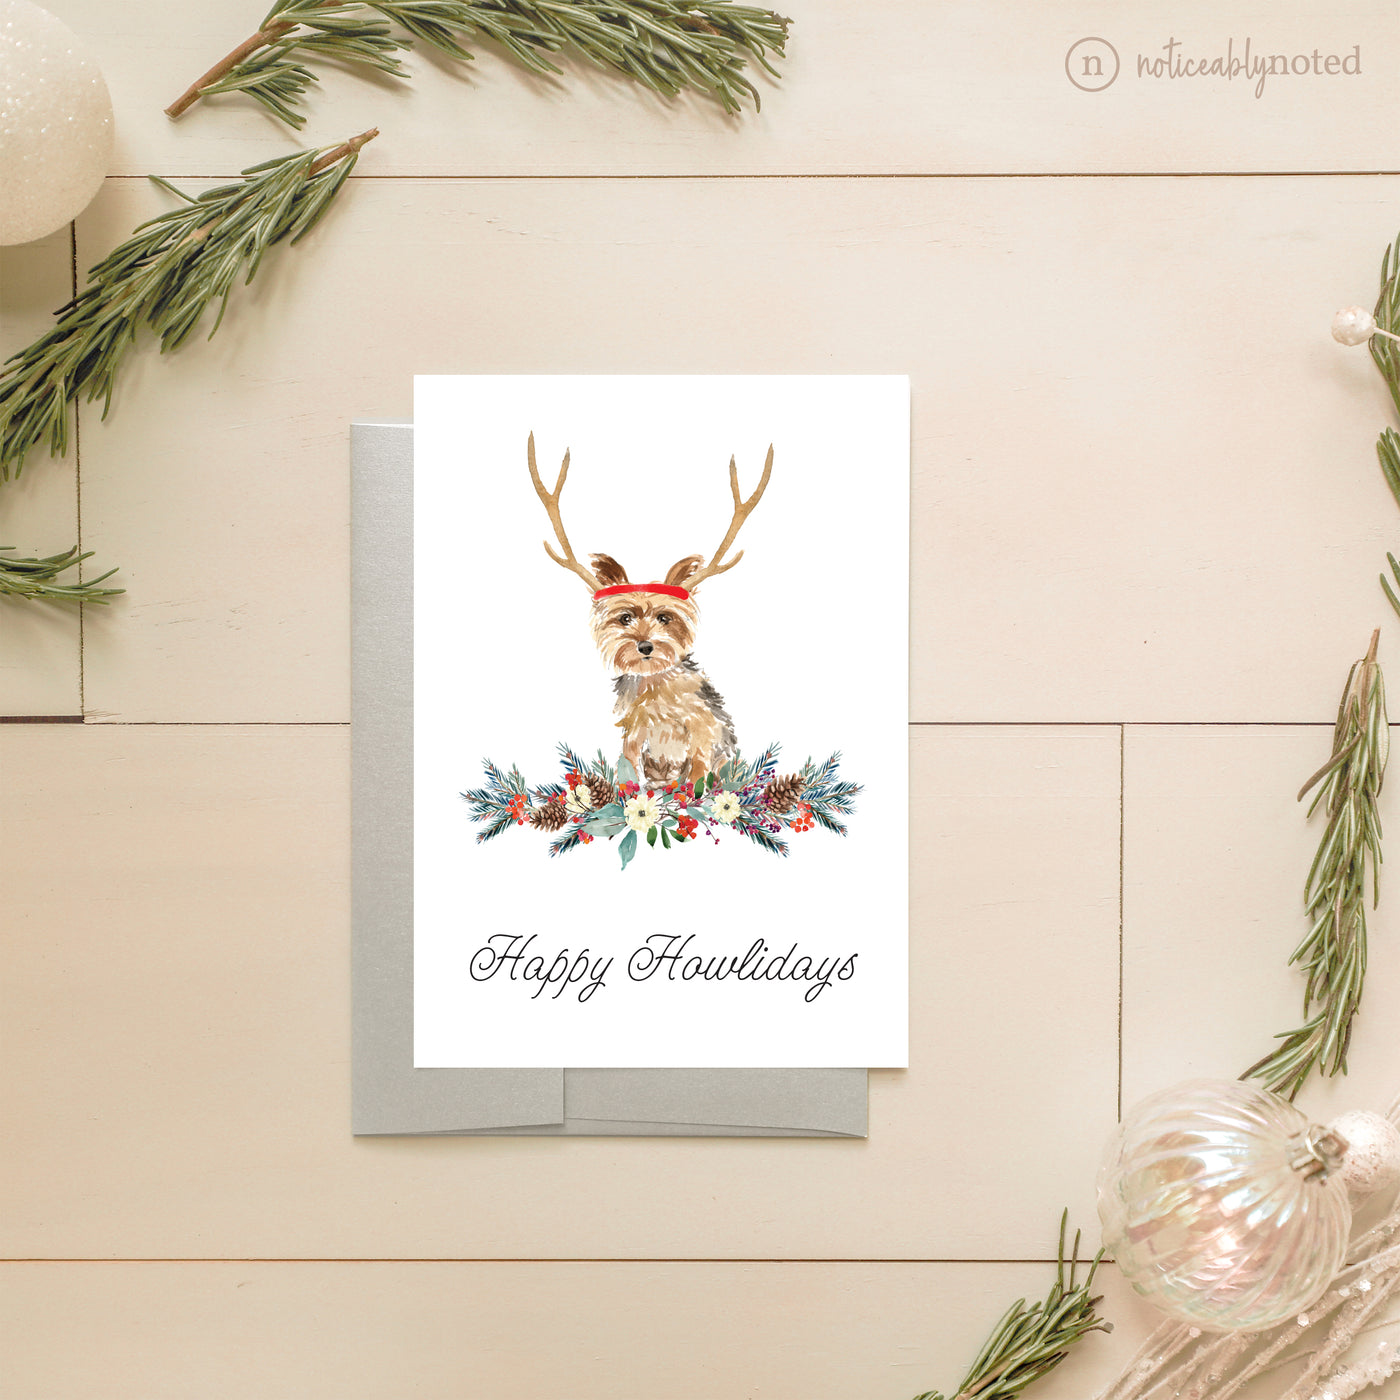 Yorkshire Terrier Holiday Card | Noticeably Noted